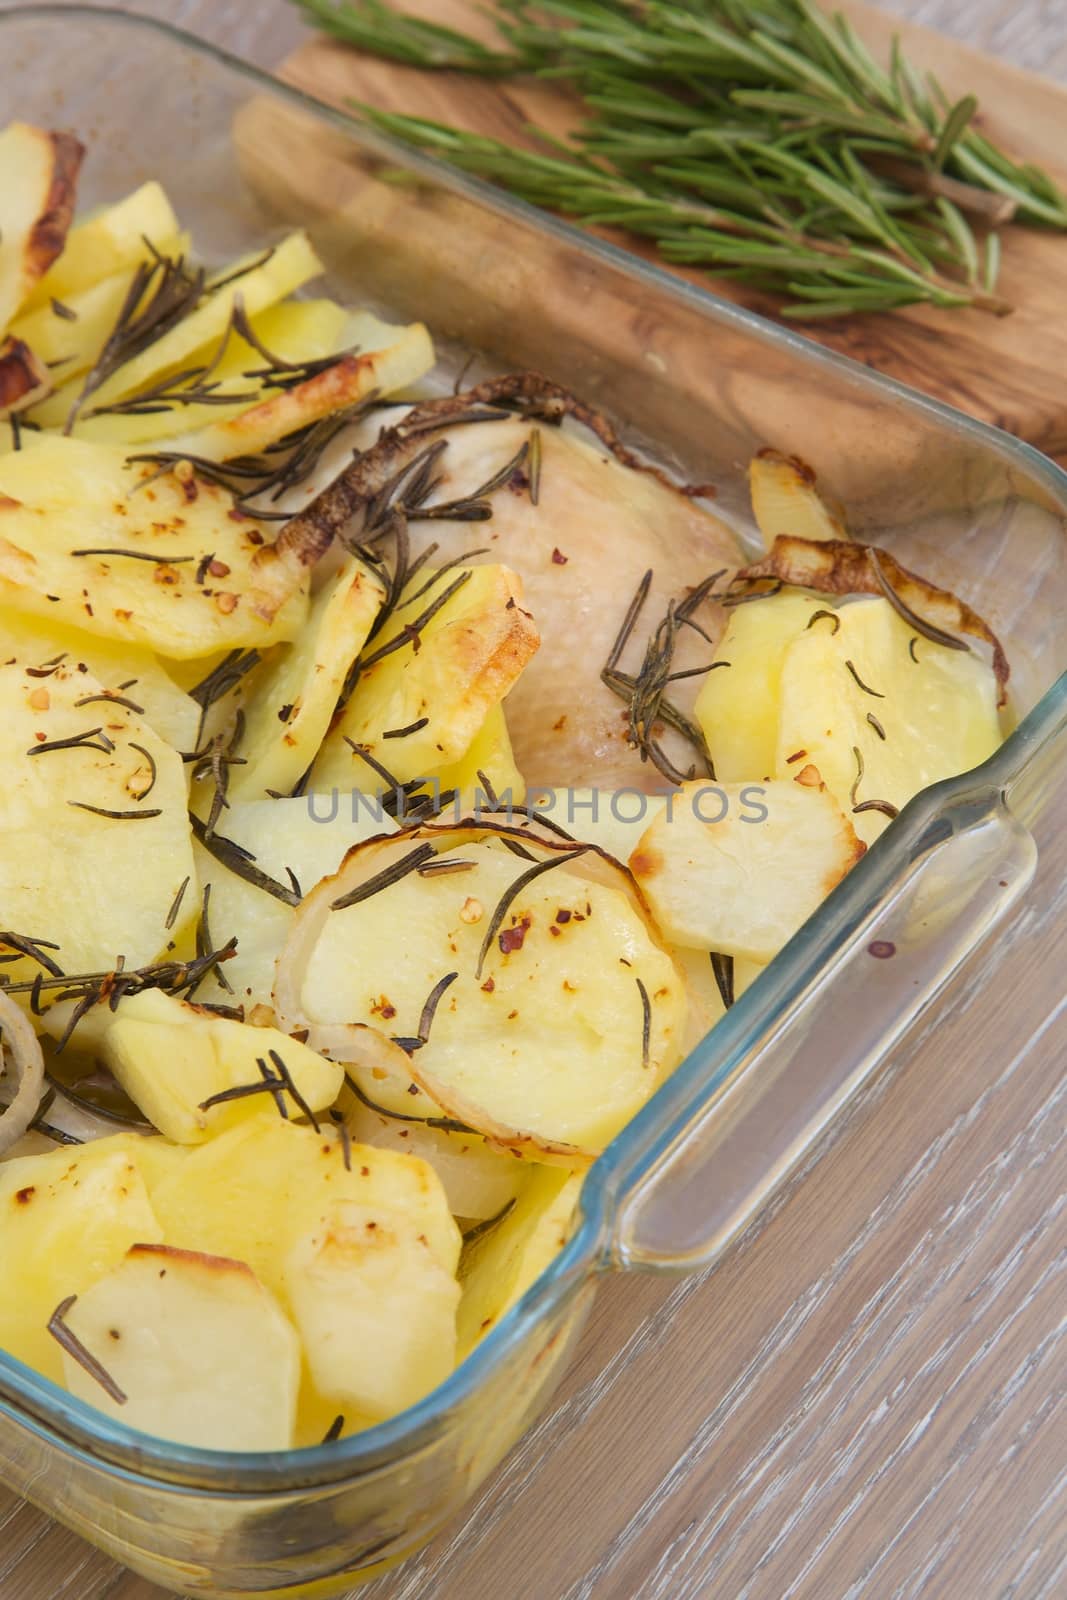 Baked potatoes with chicken and rosemary by tolikoff_photography